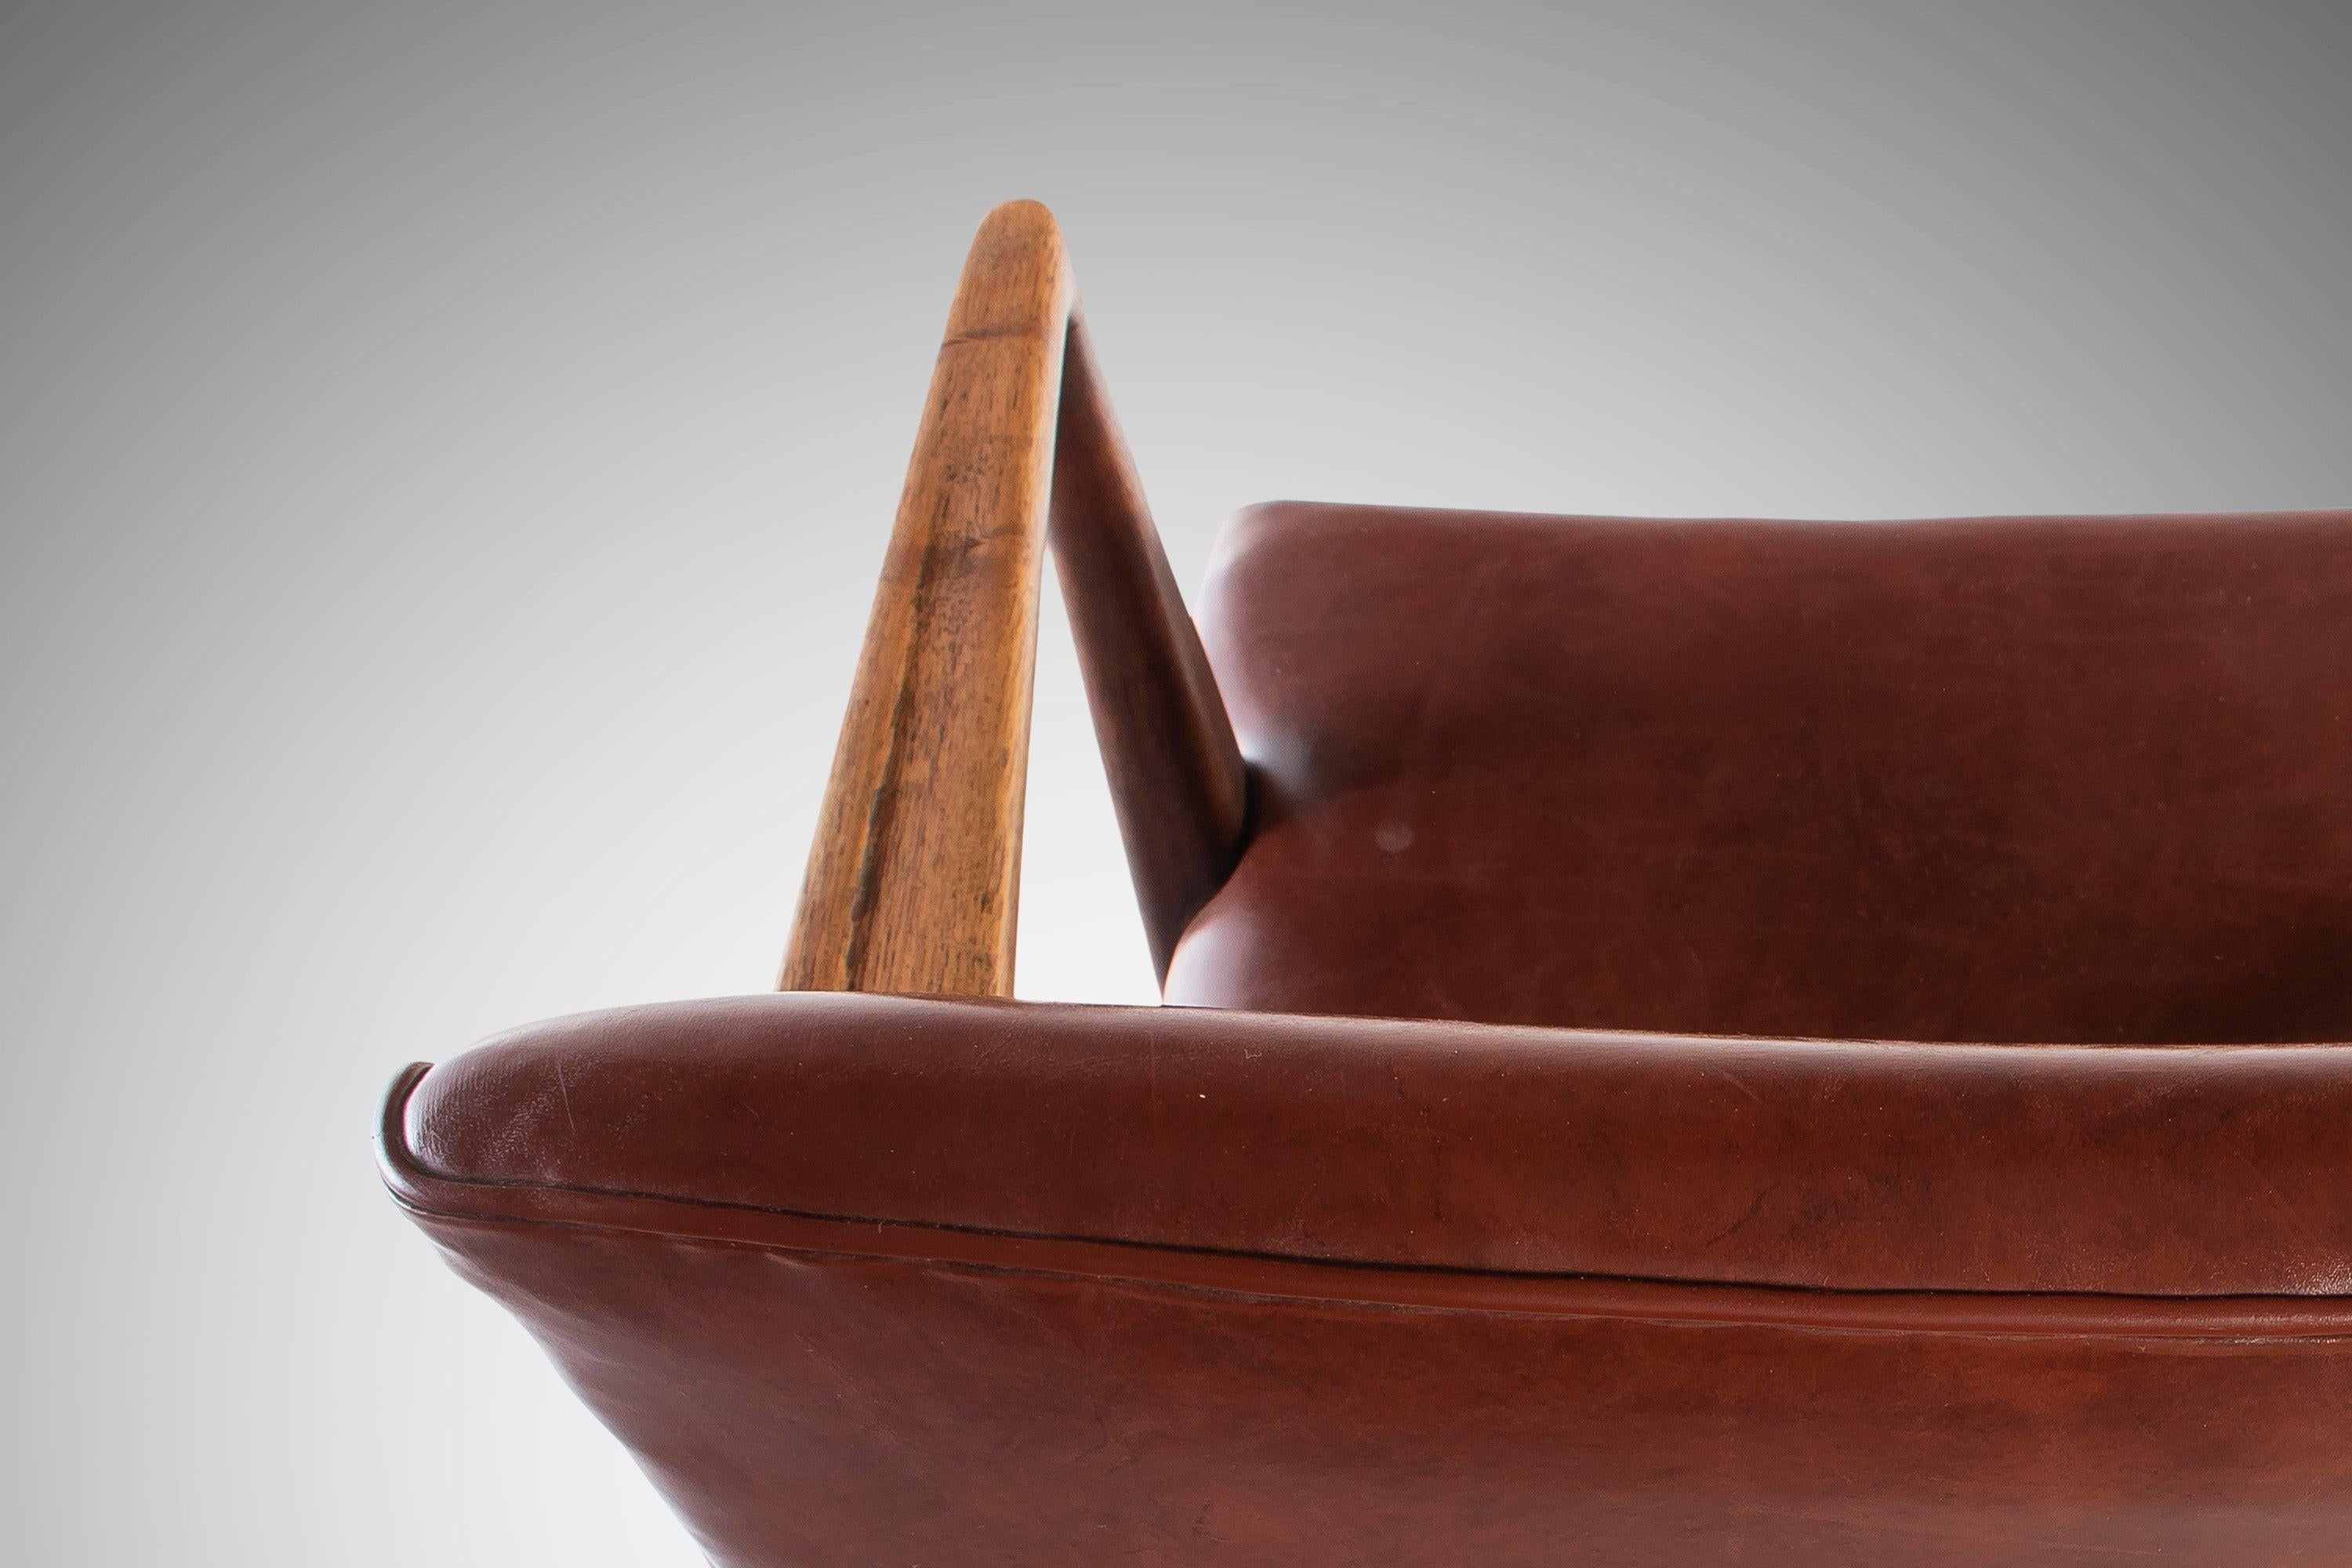 Mid-20th Century Early Jens Risom Model 108 Arm Chair for Risom Designs in Walnut, USA, c. 1950s For Sale